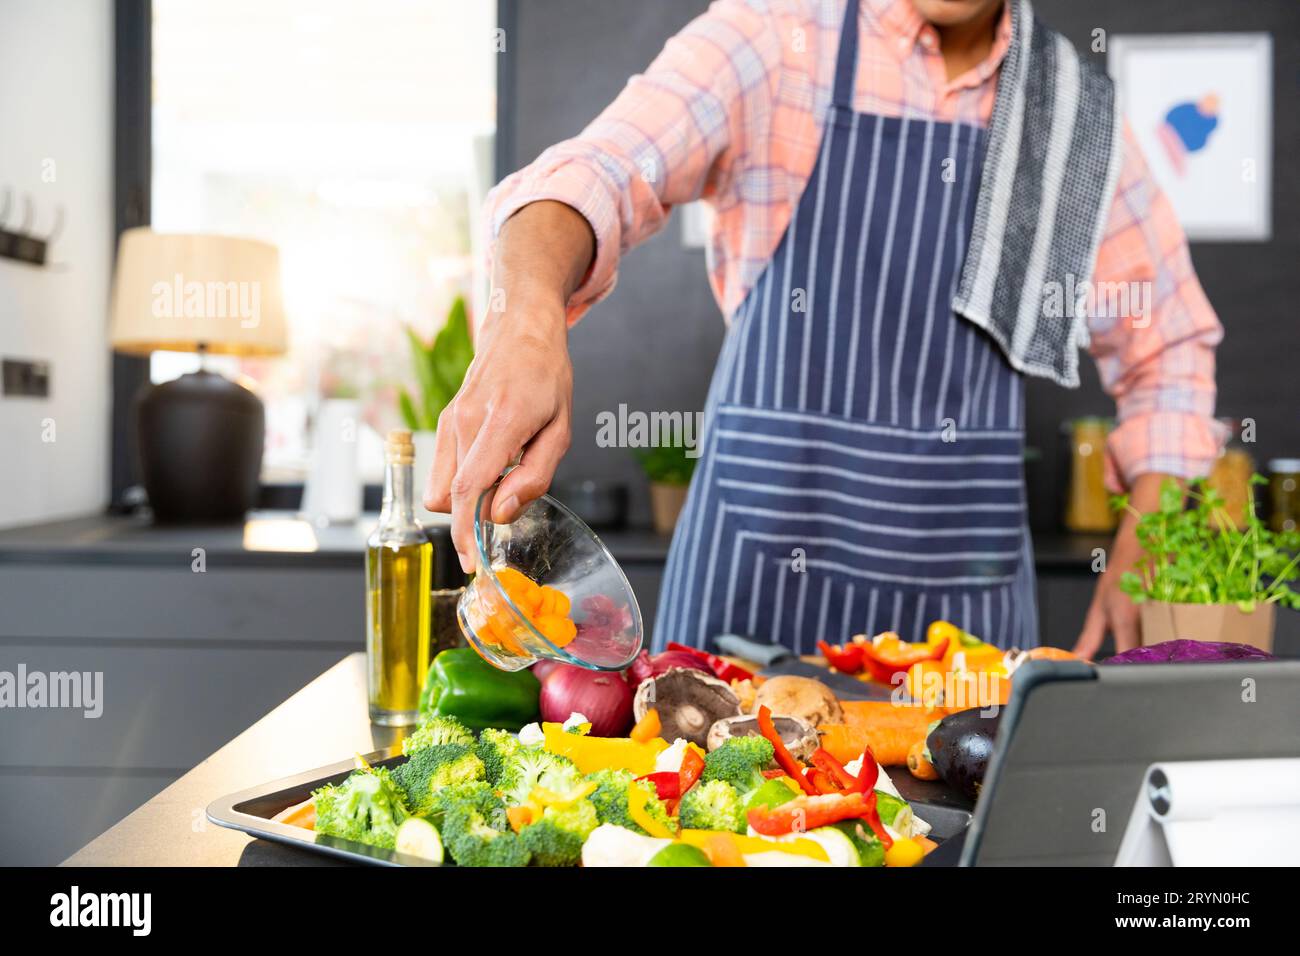 https://c8.alamy.com/comp/2RYN0HC/midsection-of-biracial-man-wearing-apron-cooking-dinner-pouring-vegetables-in-kitchen-2RYN0HC.jpg